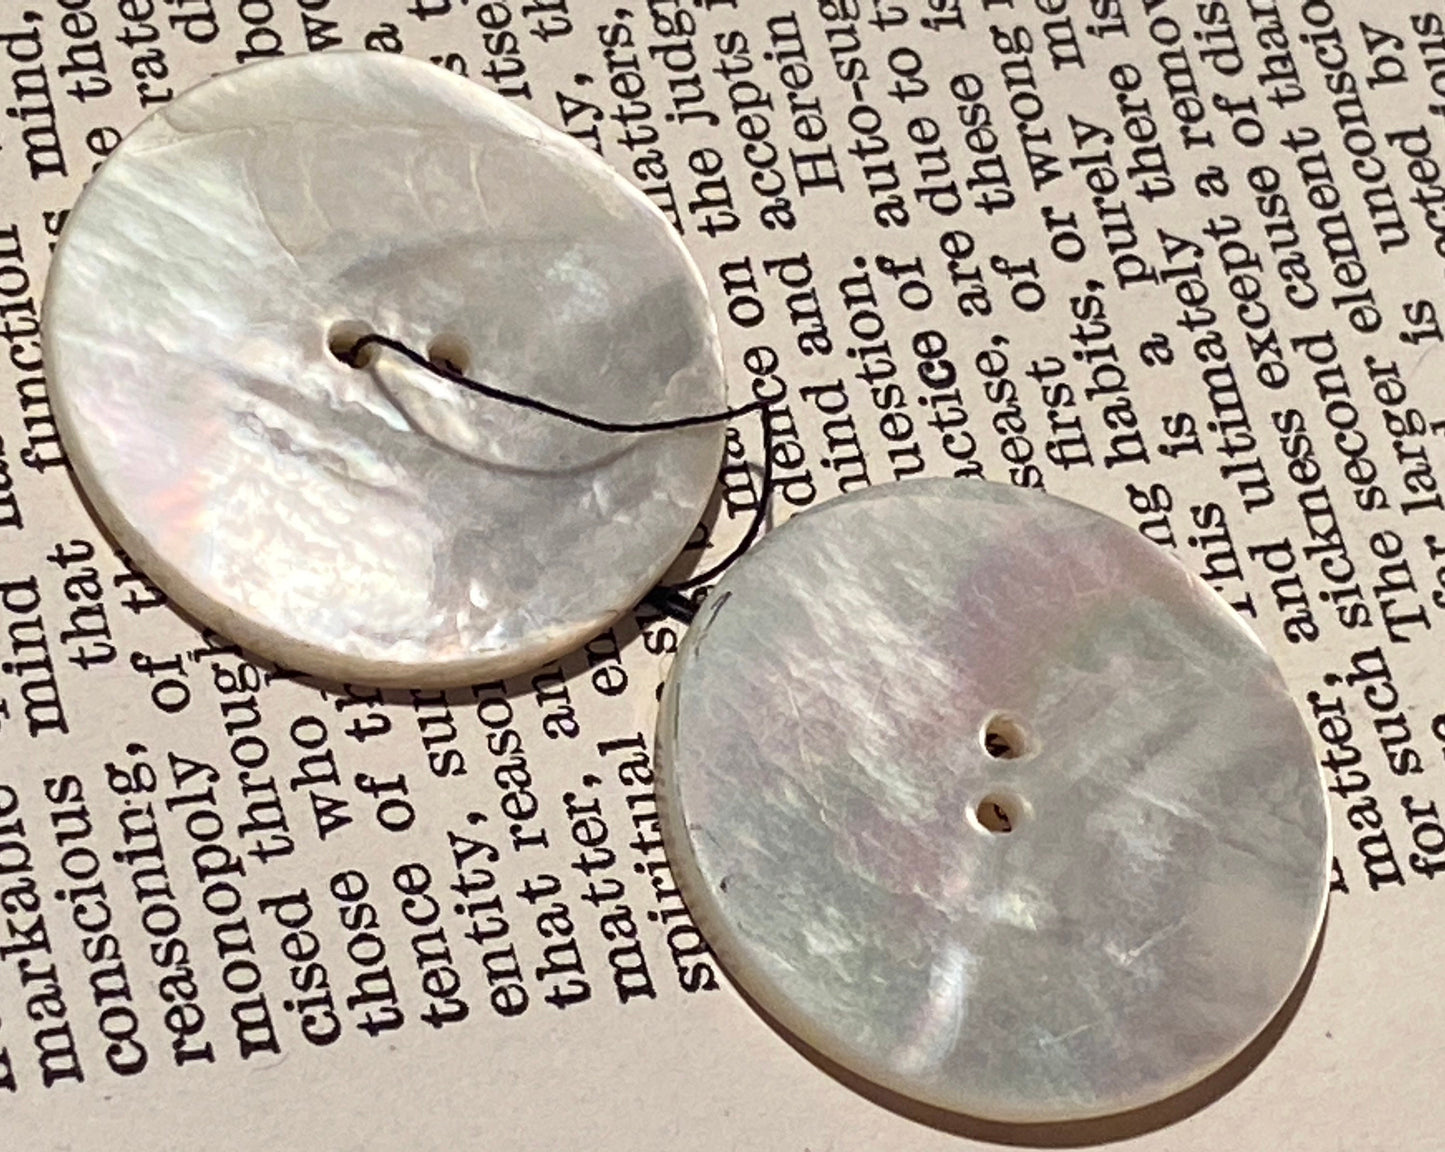 Two abalone shell buttons: 1 1/8", hand carved, raised relief cat eye, secondhand sourced, carefully matched pair